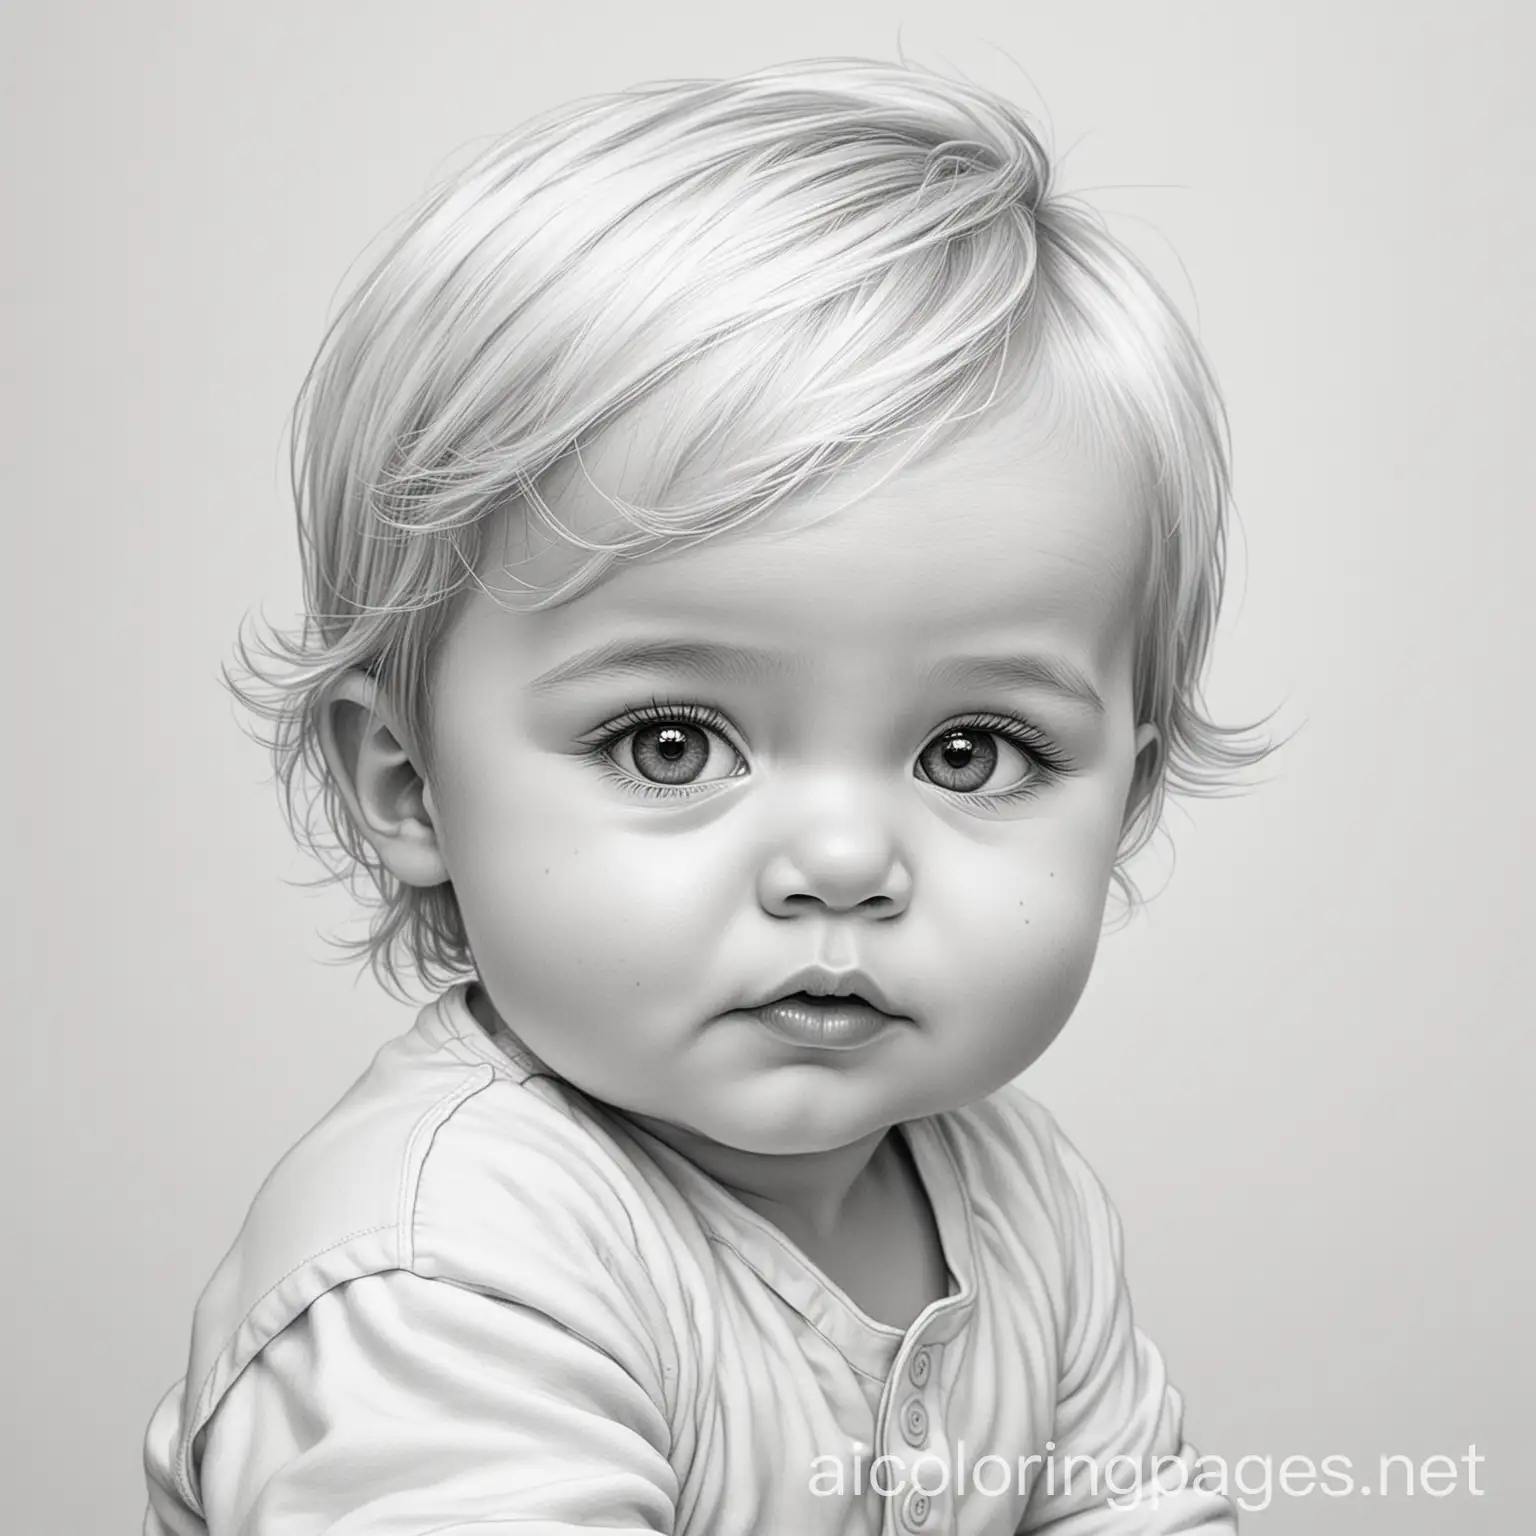 Baby Eli, Coloring Page, black and white, line art, white background, Simplicity, Ample White Space.